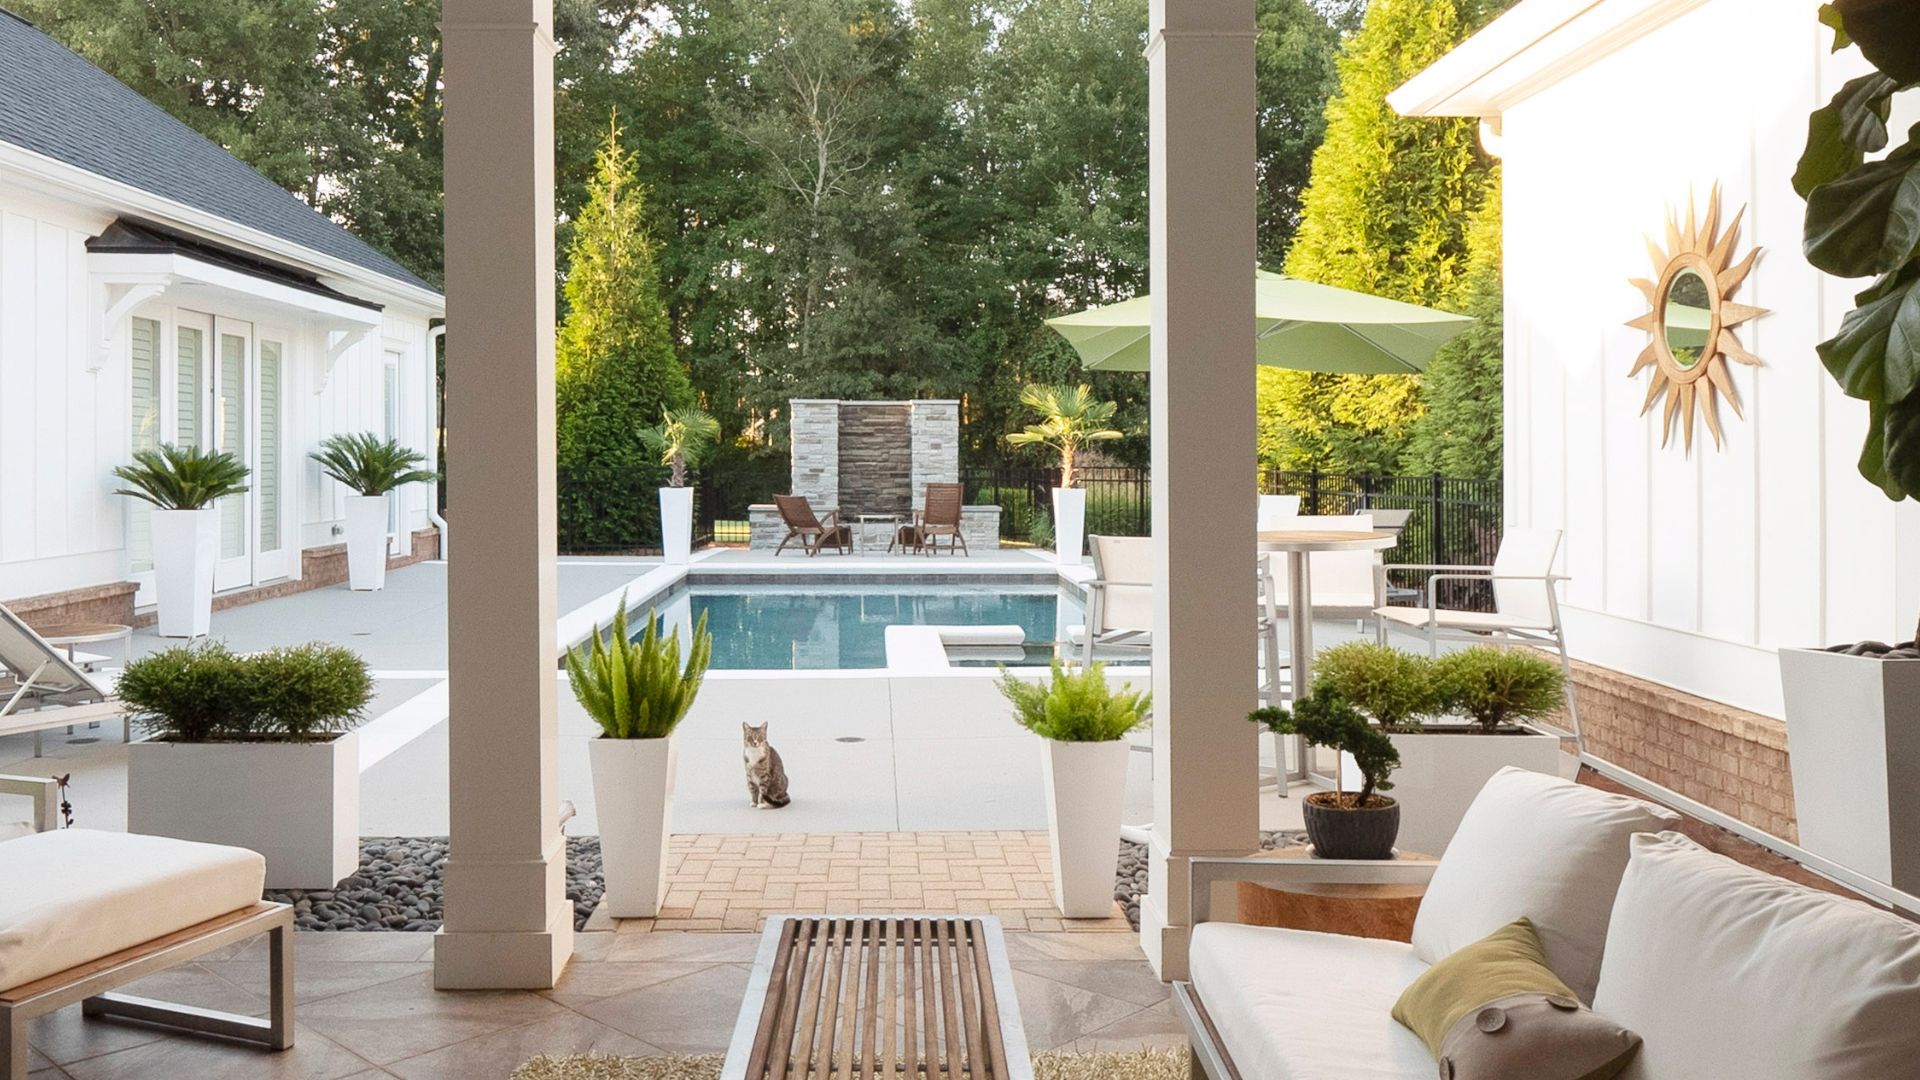 15 Beautiful Pool Area Decorating Ideas To Try This Summer